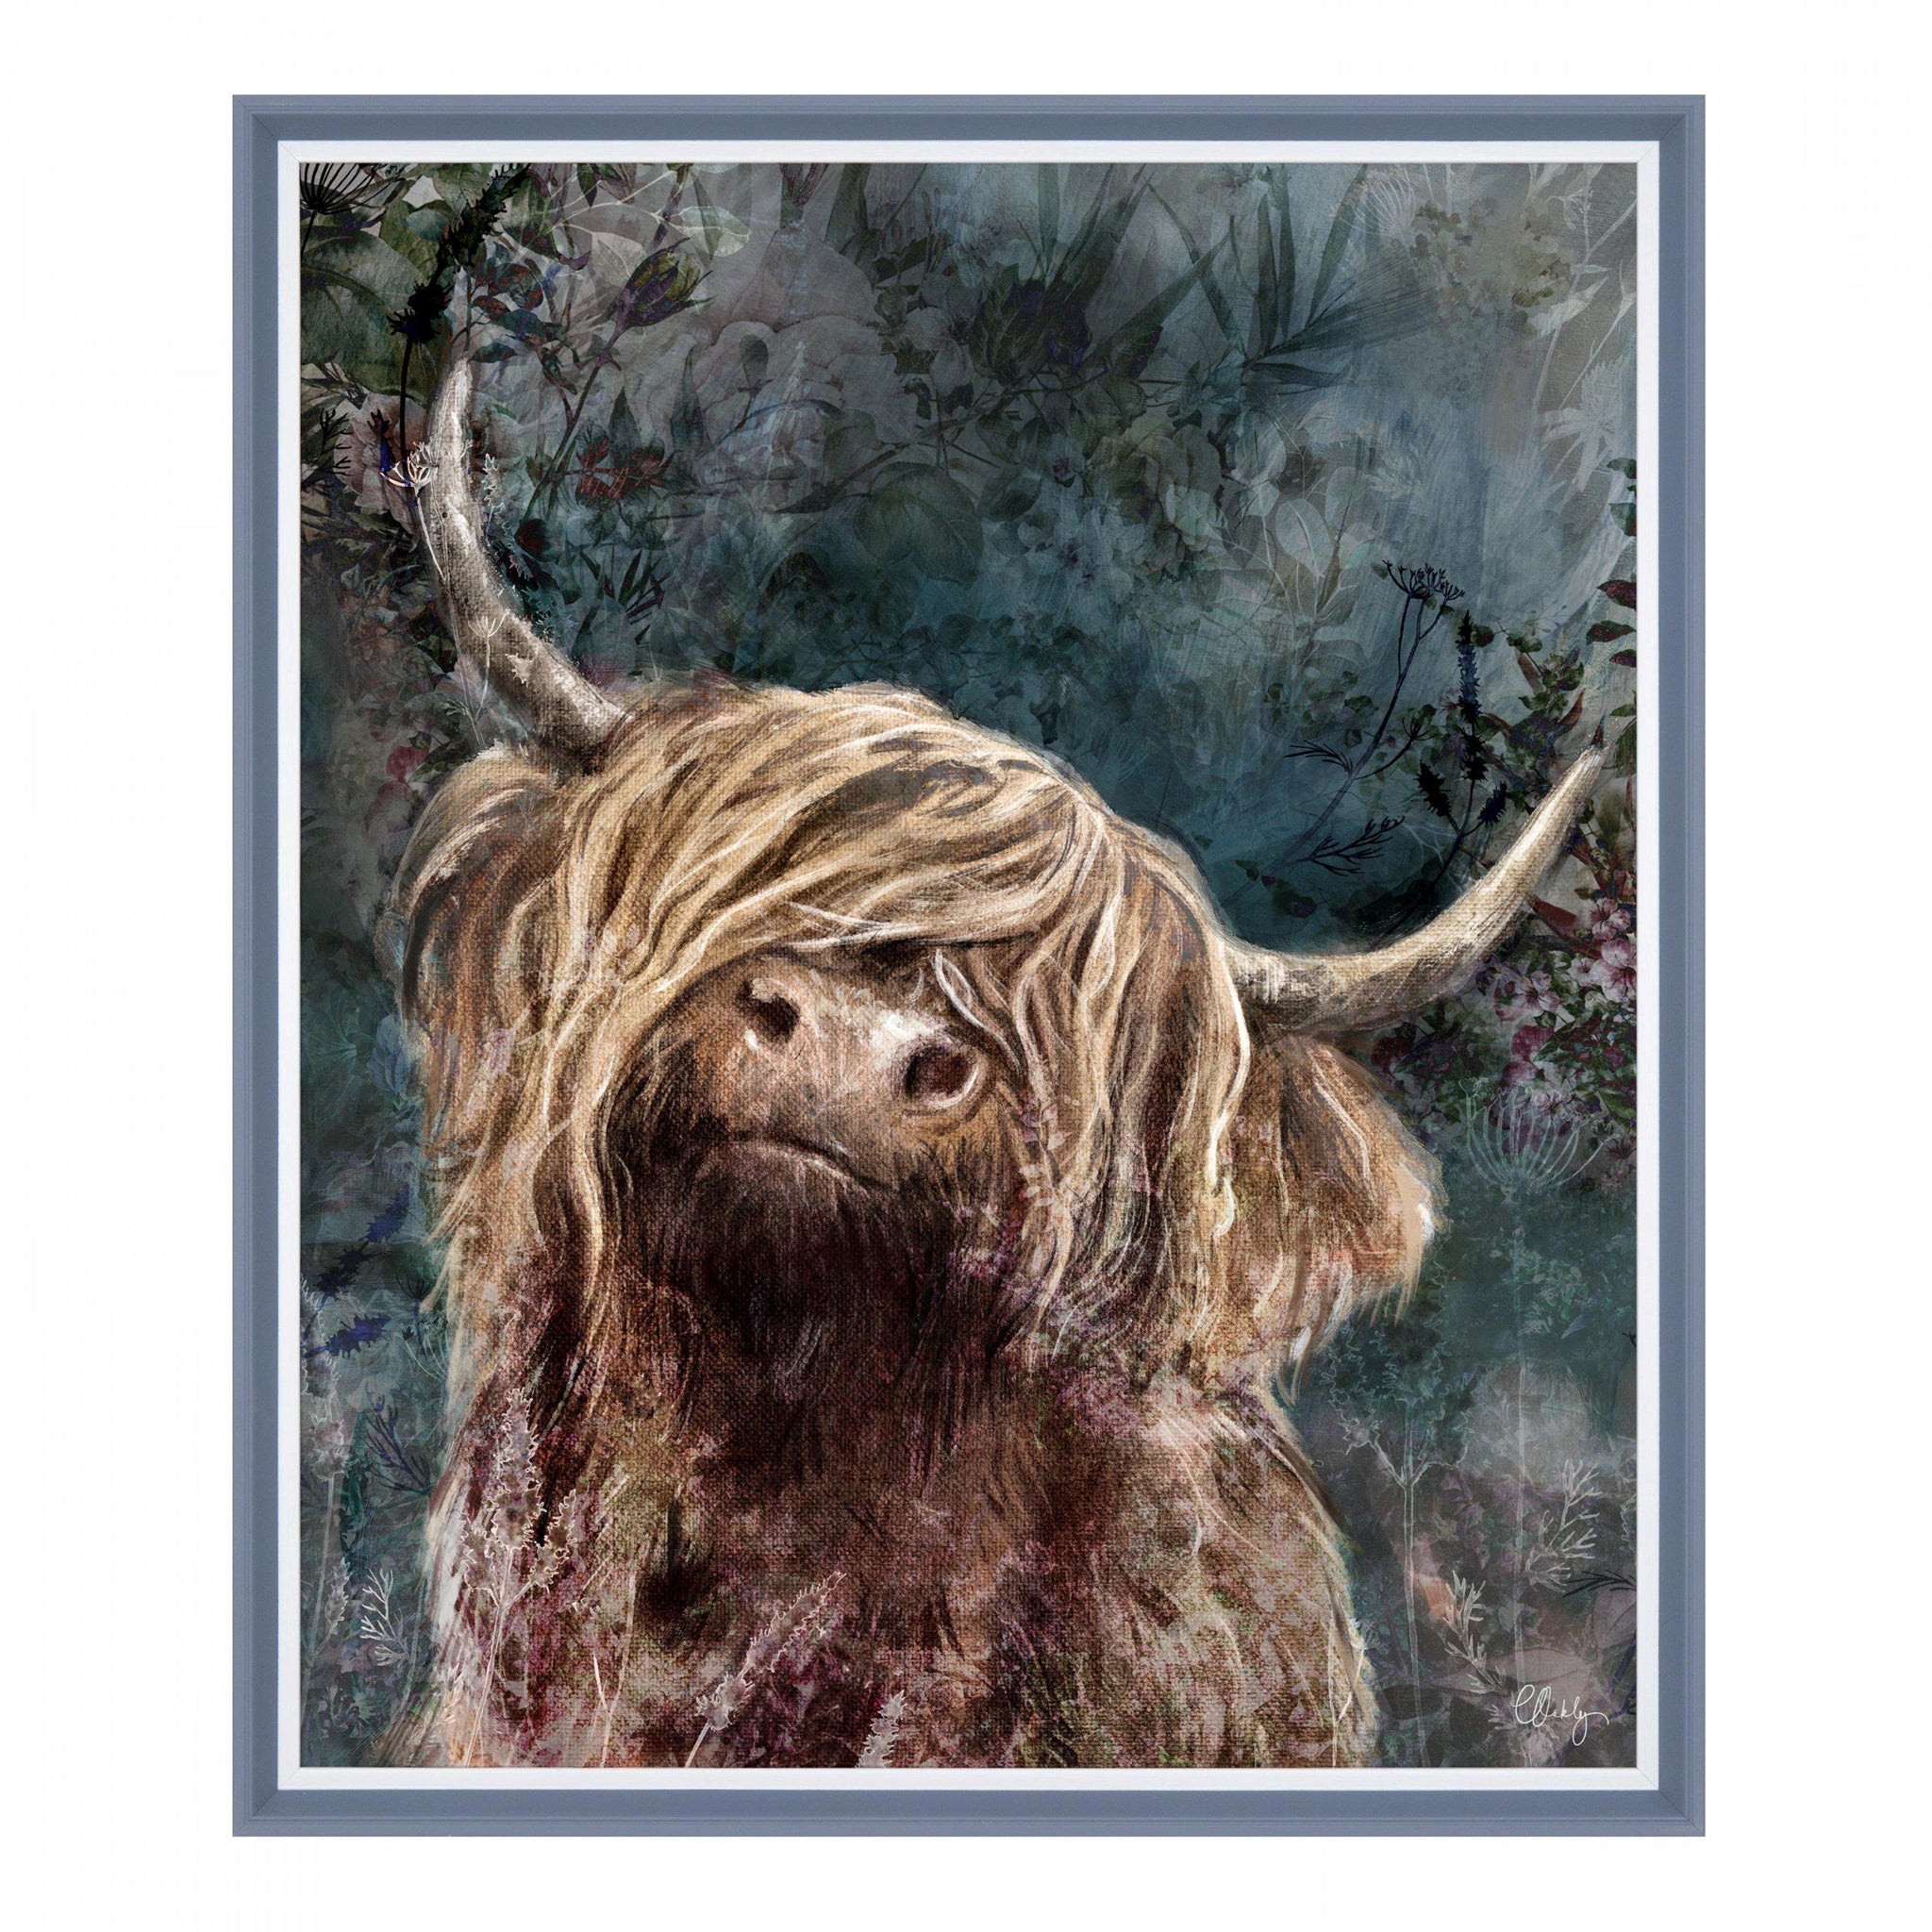 Framed canvas print of a red Highland cow with an impressionist blue background of foliage.